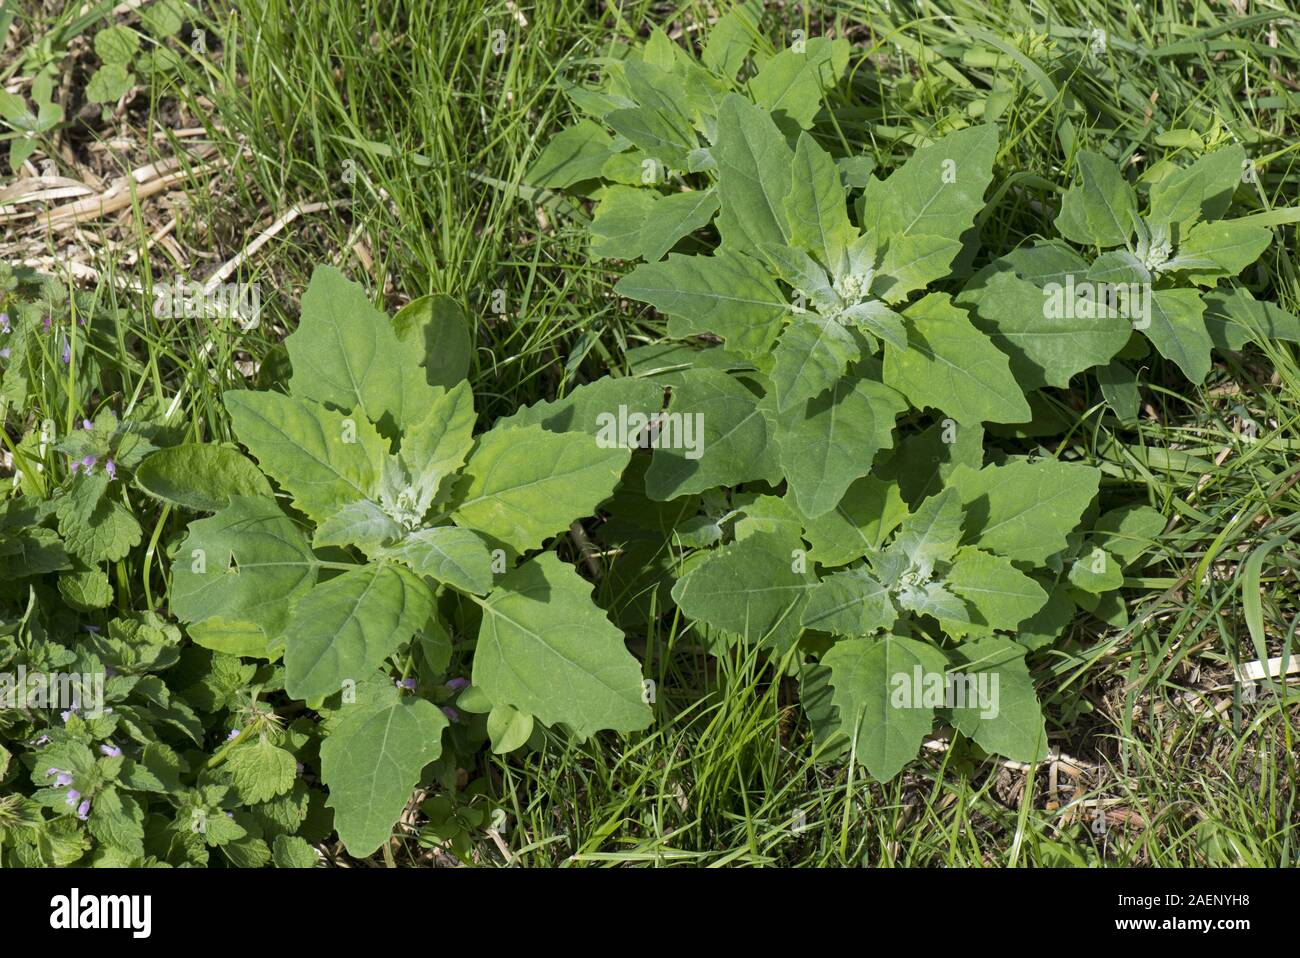 Fat hen or pigweed, Chenopodium album,young plants with young glaucous leaves, Berkshire, June Stock Photo